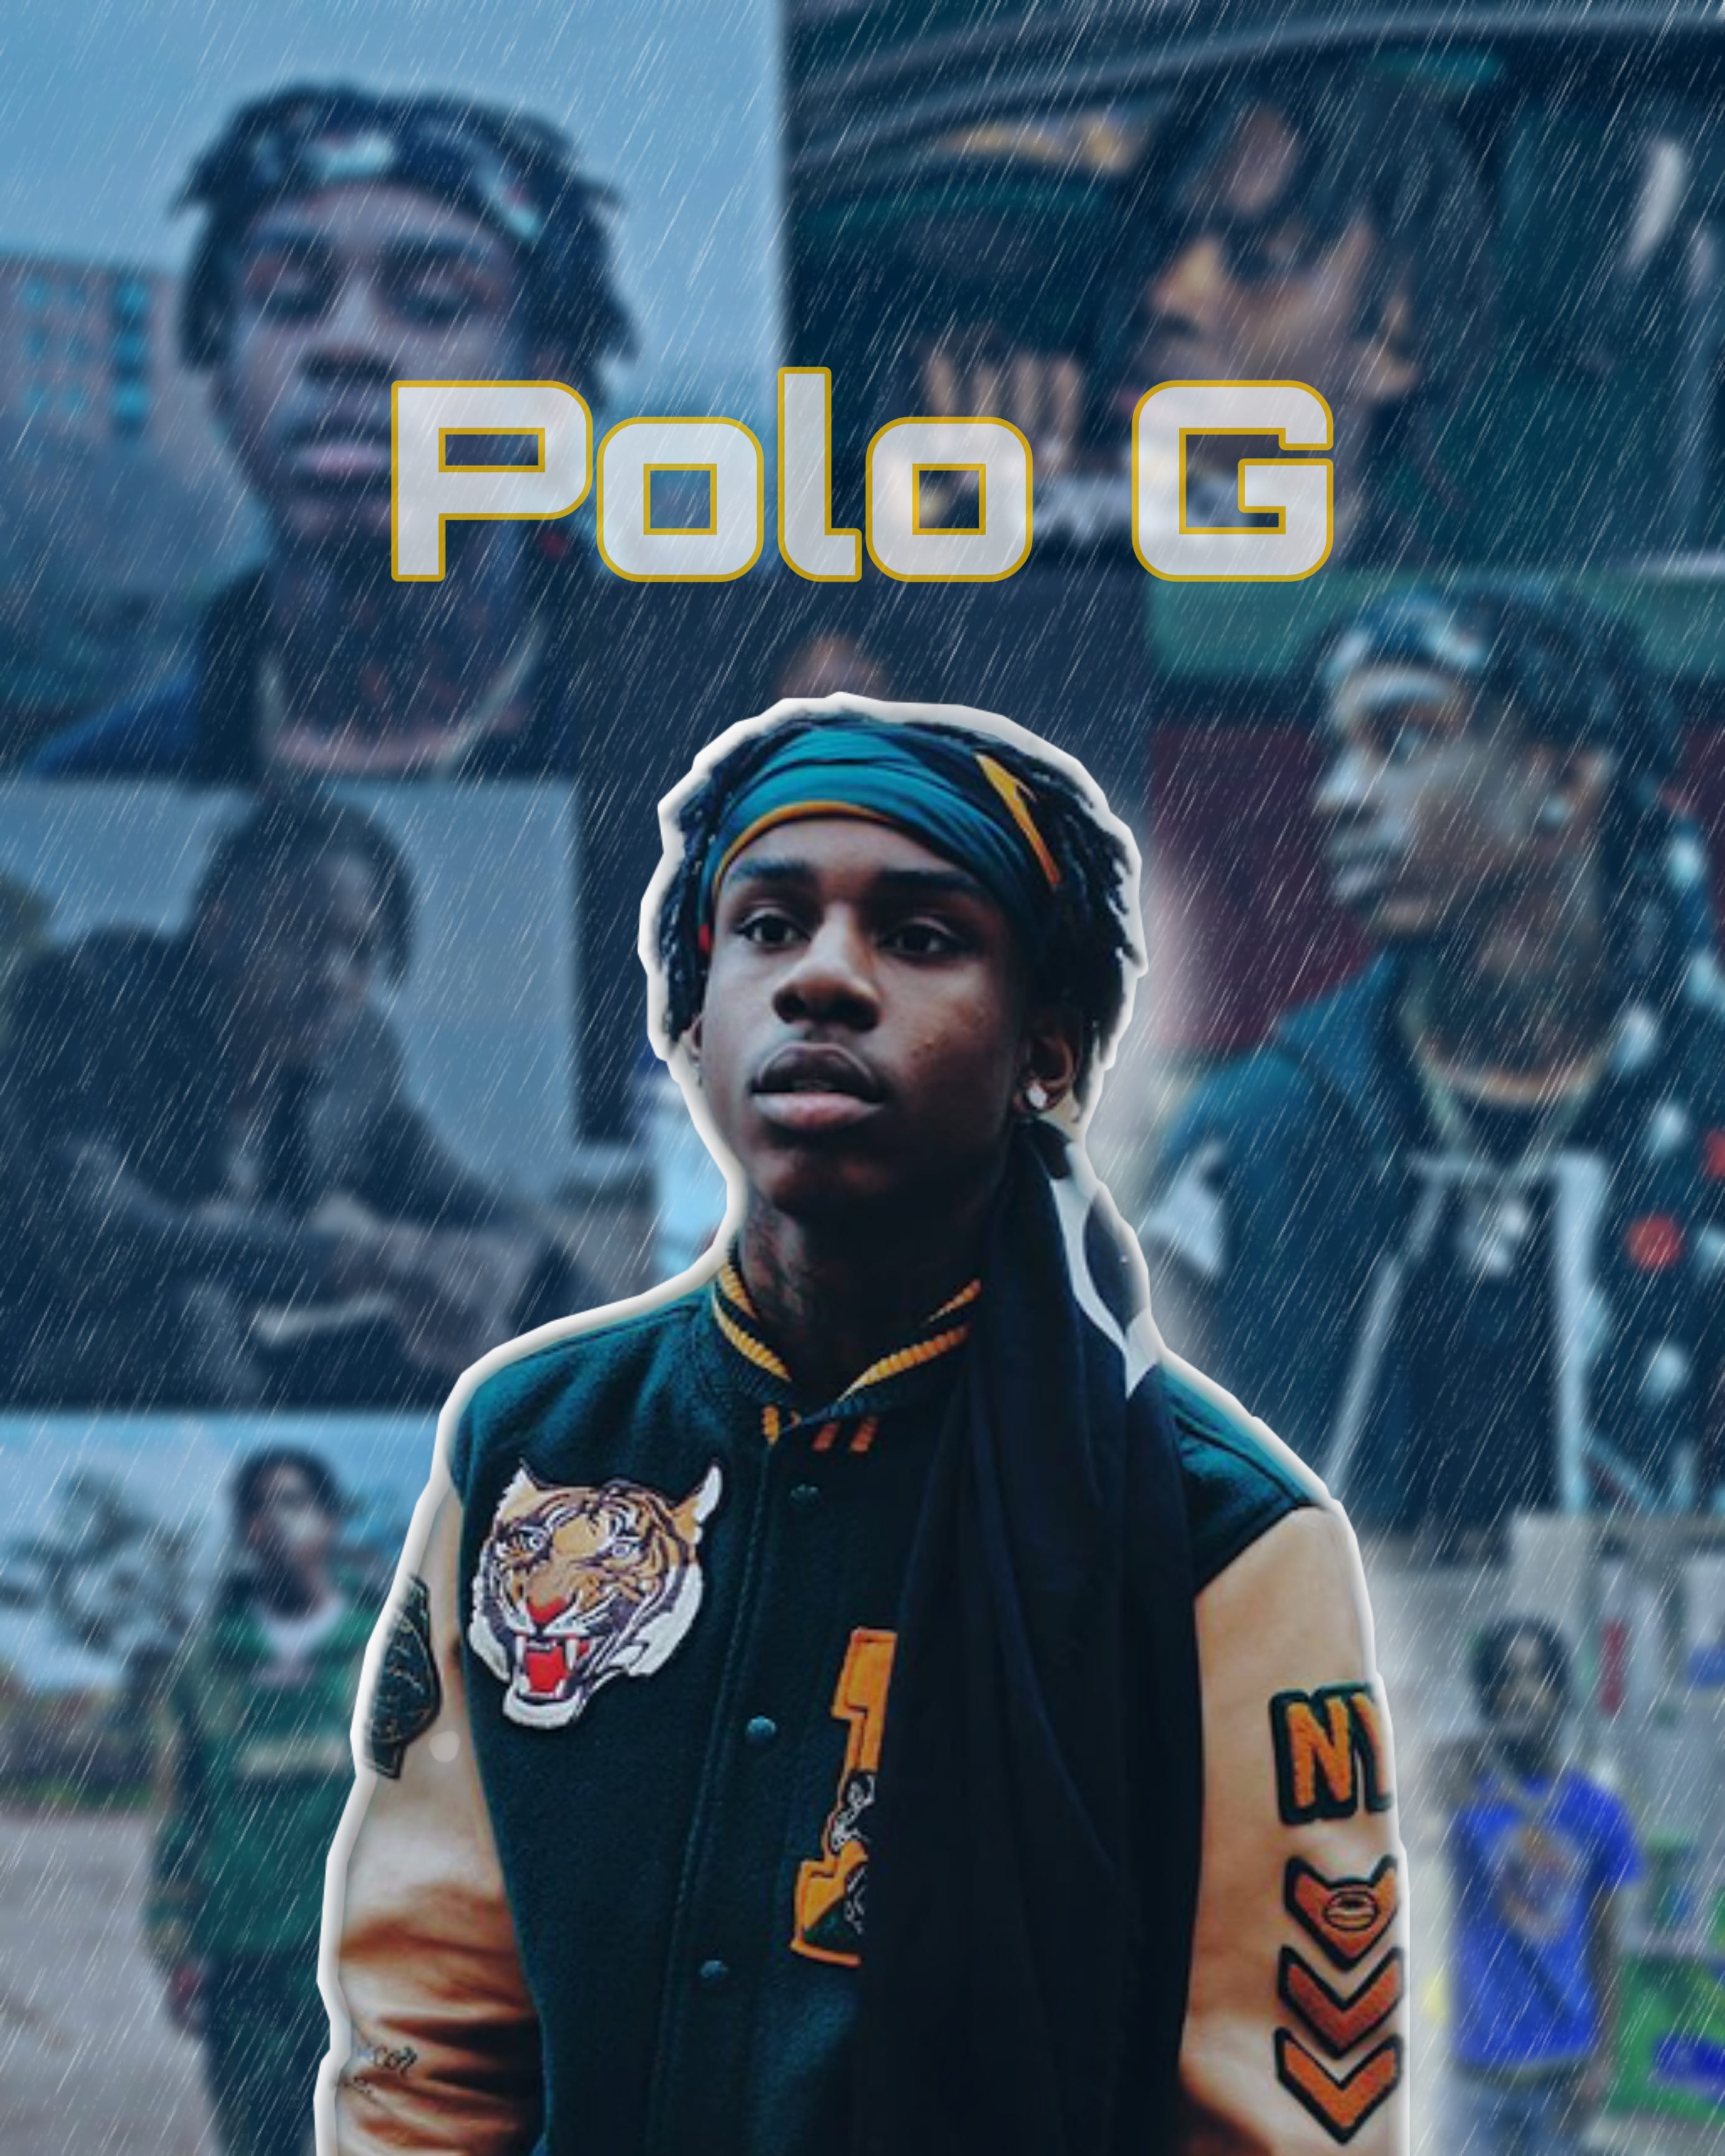 Wallpaper Polo G Kolpaper Awesome Free Hd Wallpapers Search free polo gang wallpapers on zedge and personalize your phone to suit you. wallpaper polo g kolpaper awesome